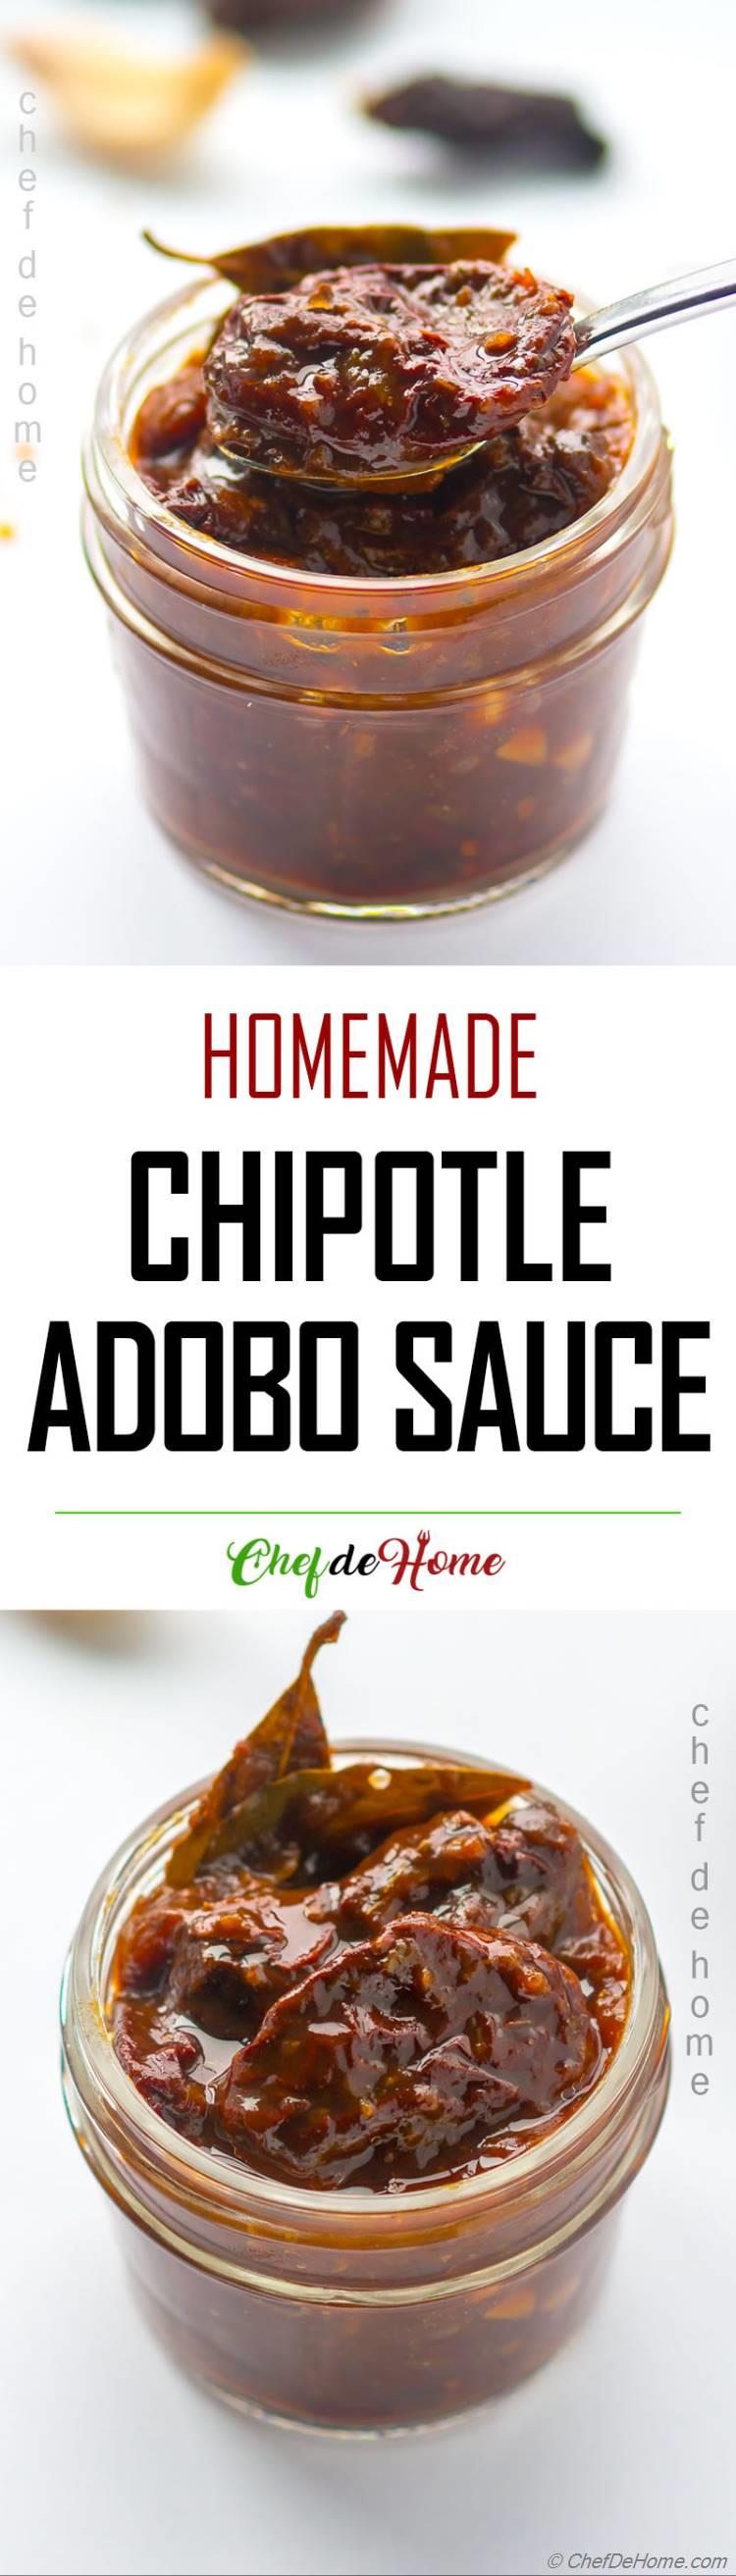 Delicious Adobo Sauce of Chipotle Peppers